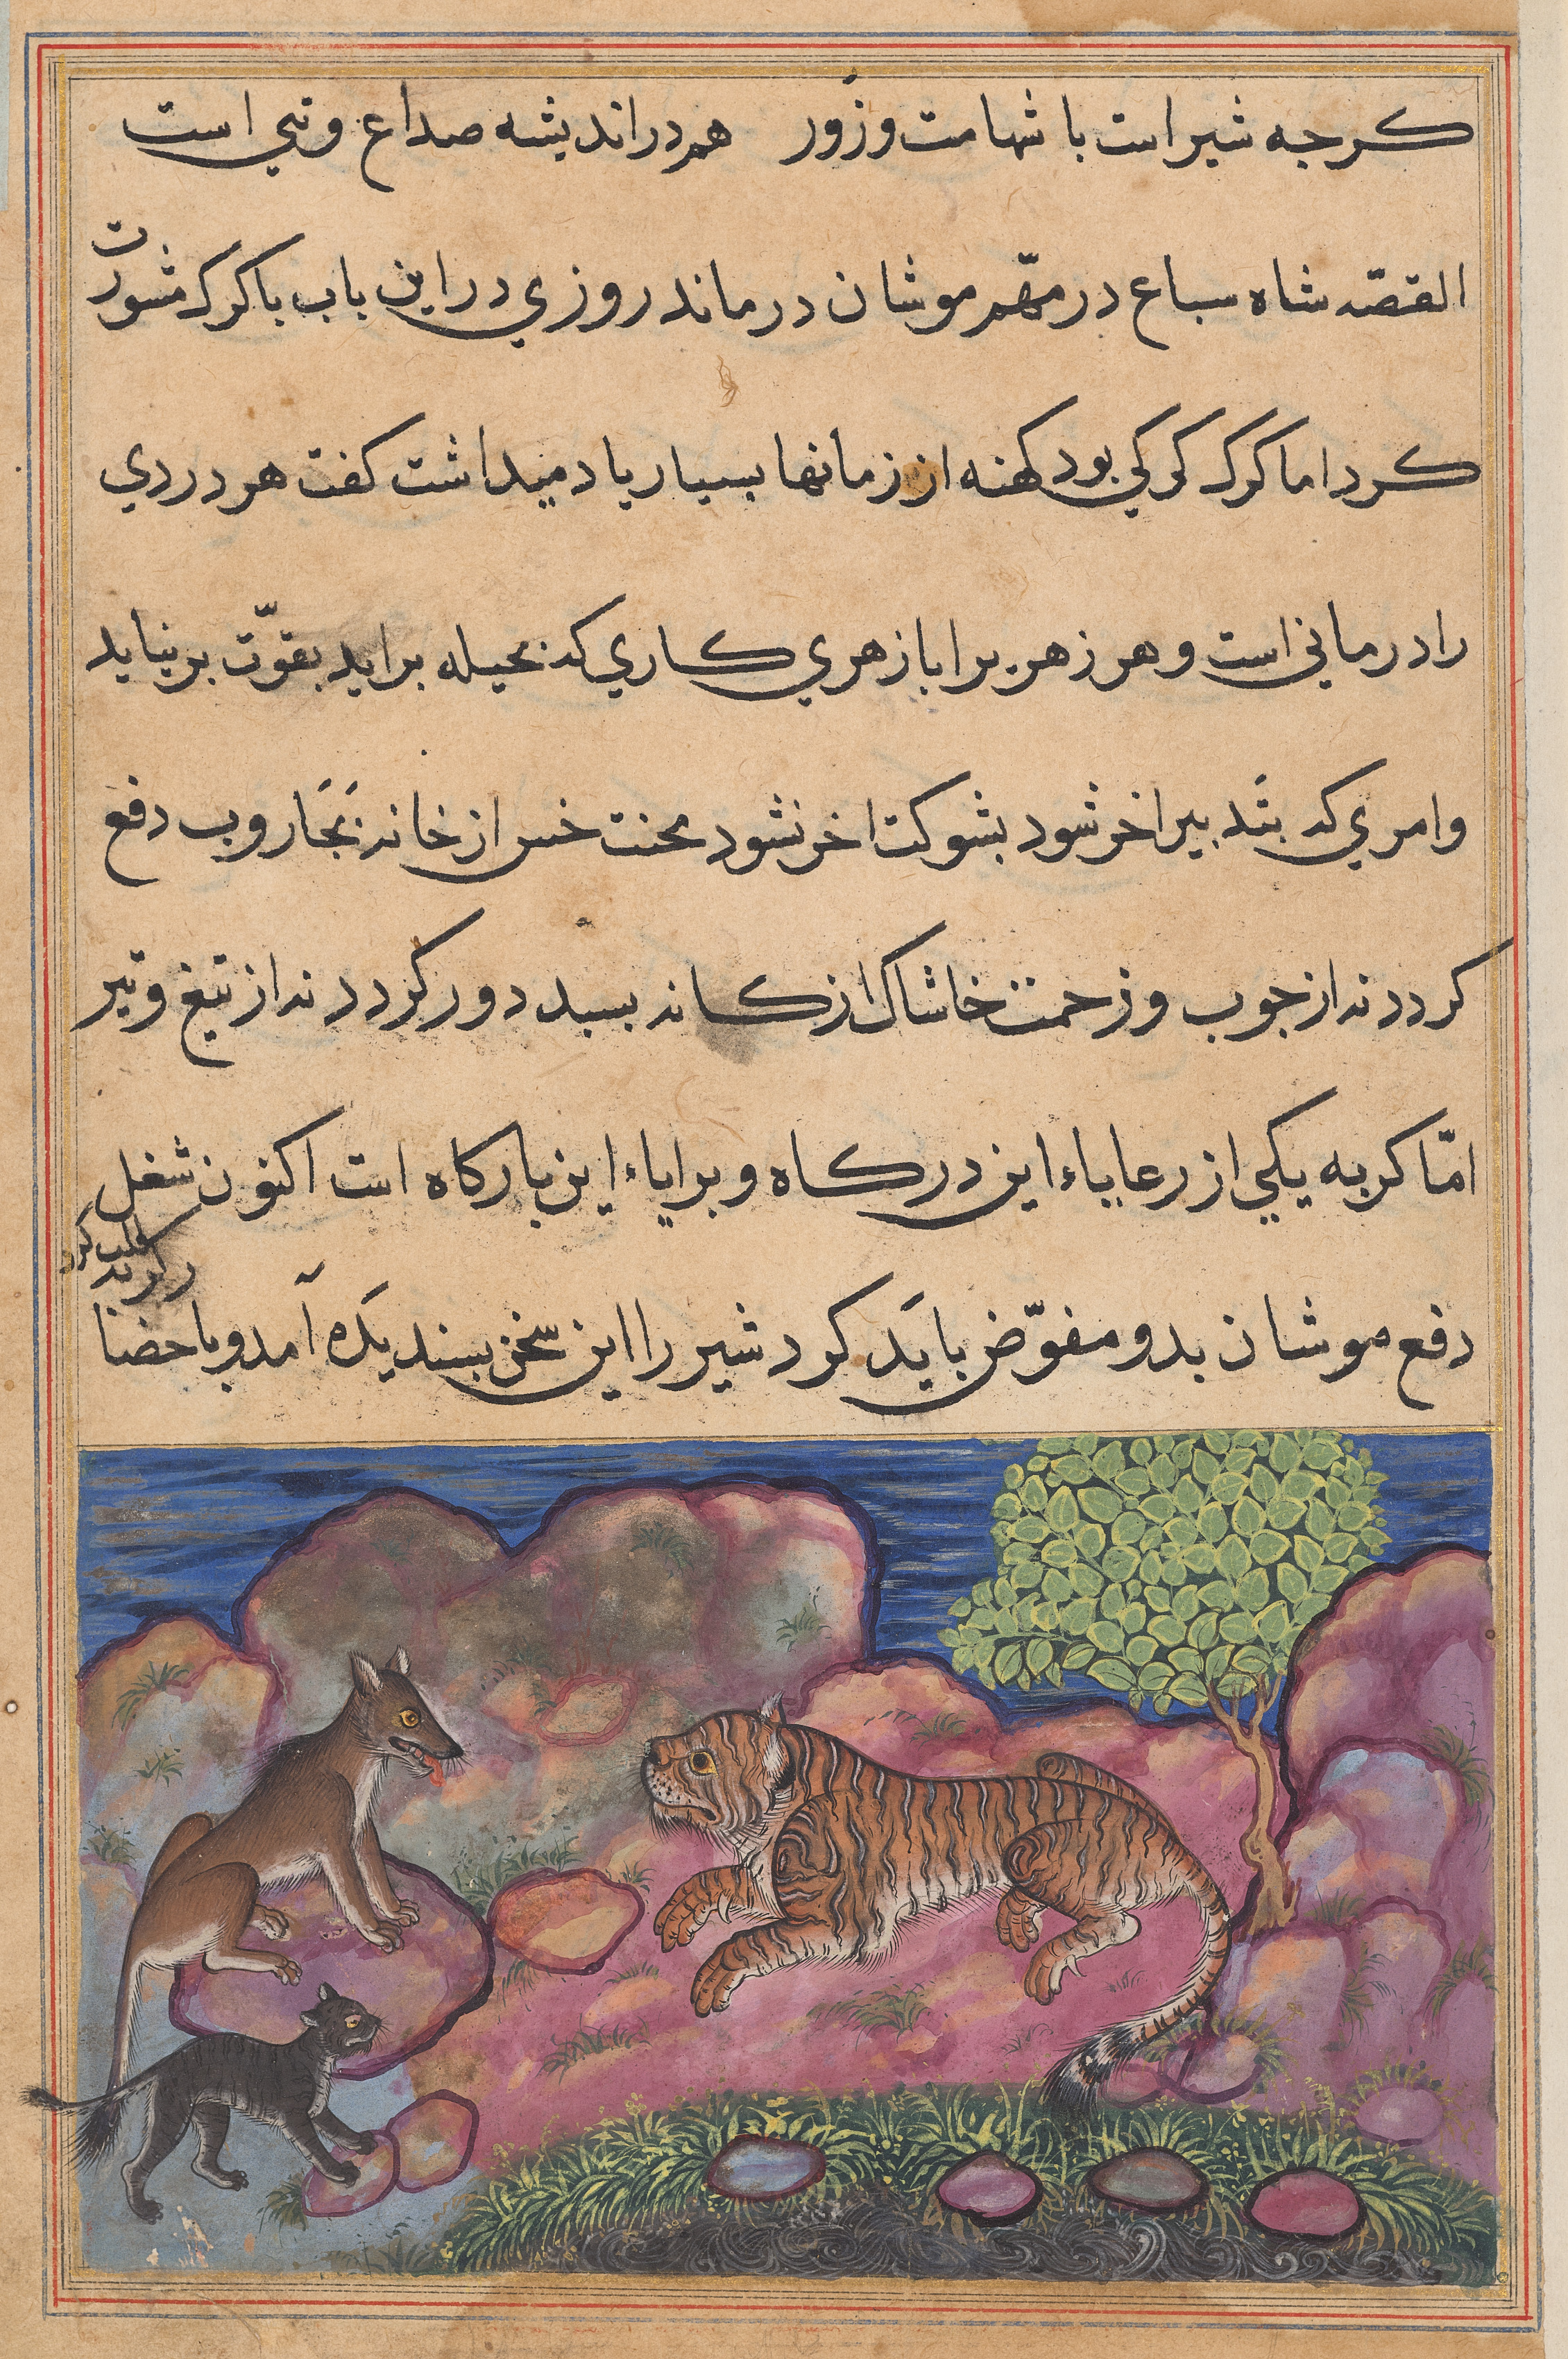 The wolf advises the lion to consult the cat, from a Tuti-nama (Tales of a Parrot): Fifteenth Night